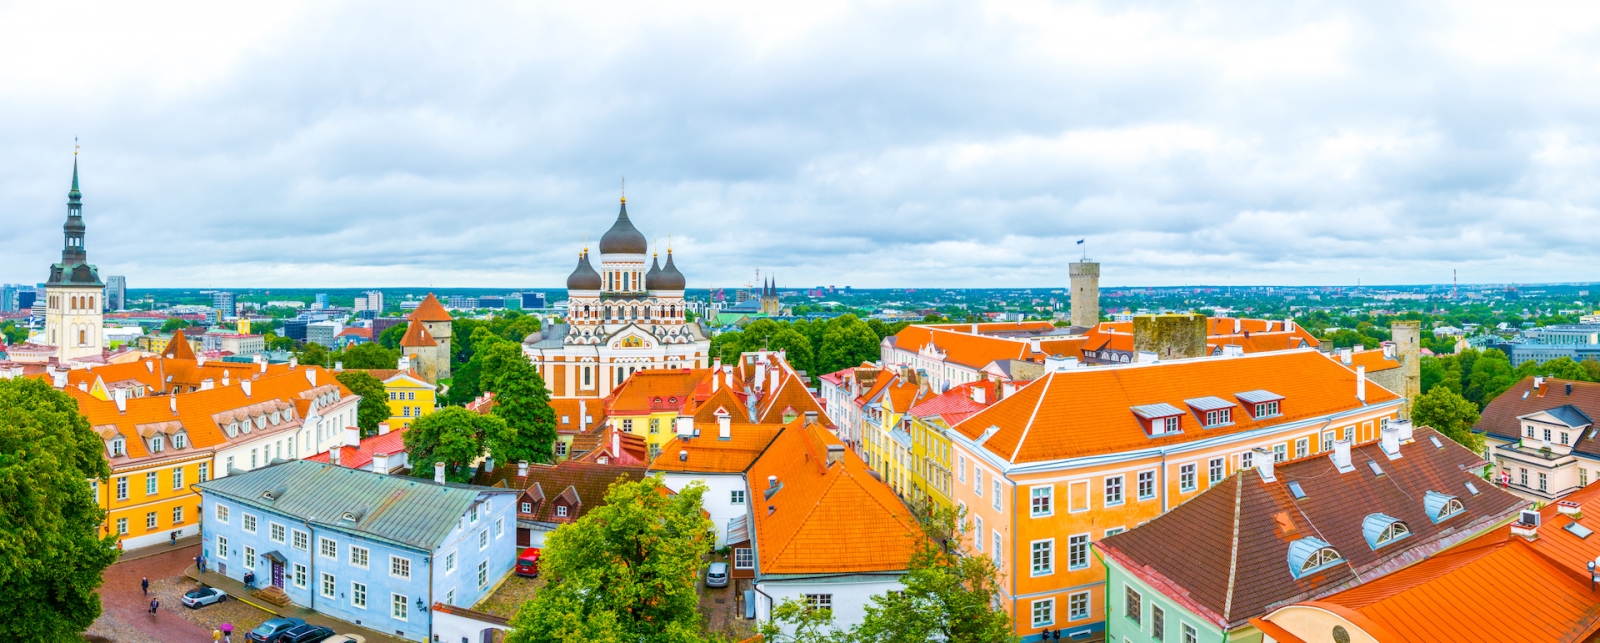 Aerial view of the Toompea castle and Alexander Nevski Cathedral in Tallinn, Estonia